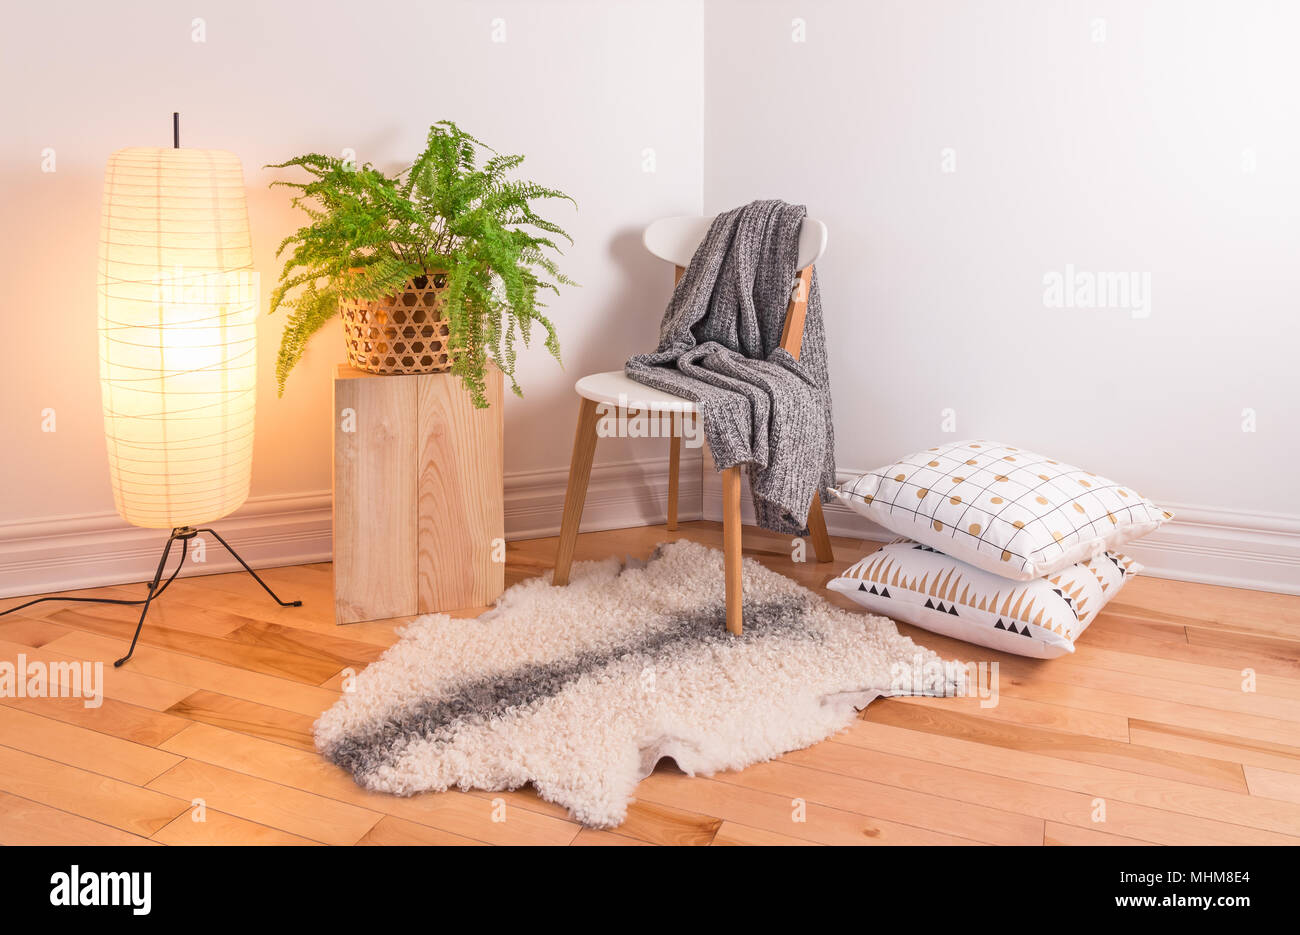 Room with cozy light decorated in Scandinavian style, using natural materials. Stock Photo